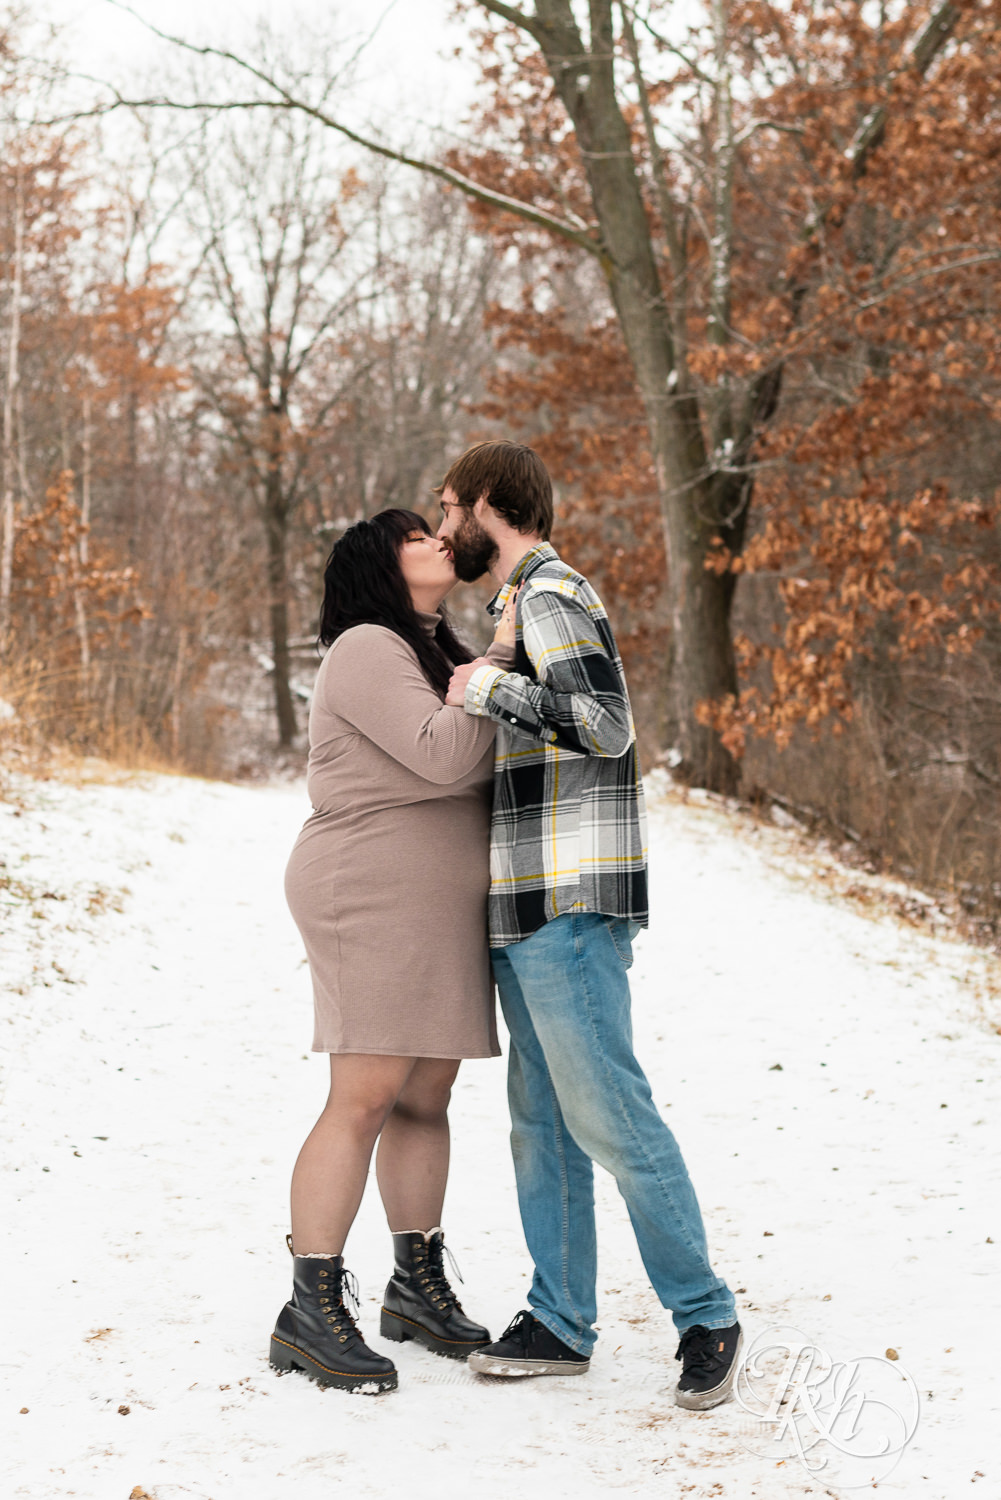 Man in flannel and woman in brown dress kiss in the snow during winter engagement photos at Lebanon Hills Regional Park in Eagan, Minnesota.